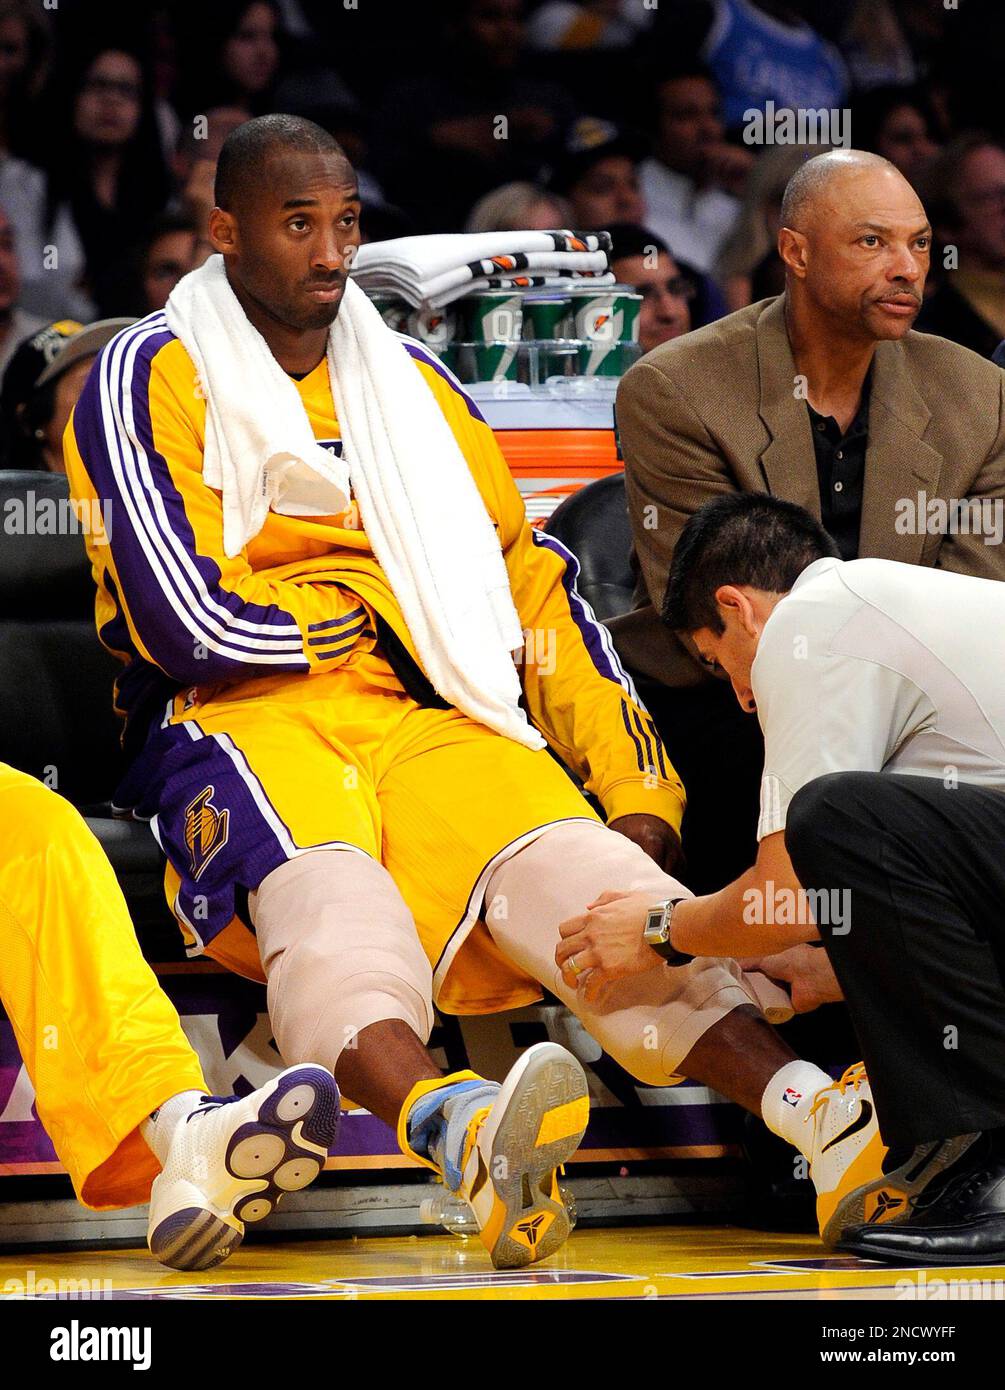 Los Angeles Lakers shooting guard Kobe Bryant, left, gets his knees bandaged during the second half of their preseason NBA basketball game against the Utah Jazz, Sunday, Oct. 17, 2010, in Los Angeles. (AP Photo/Mark J. Terrill) Stock Photo